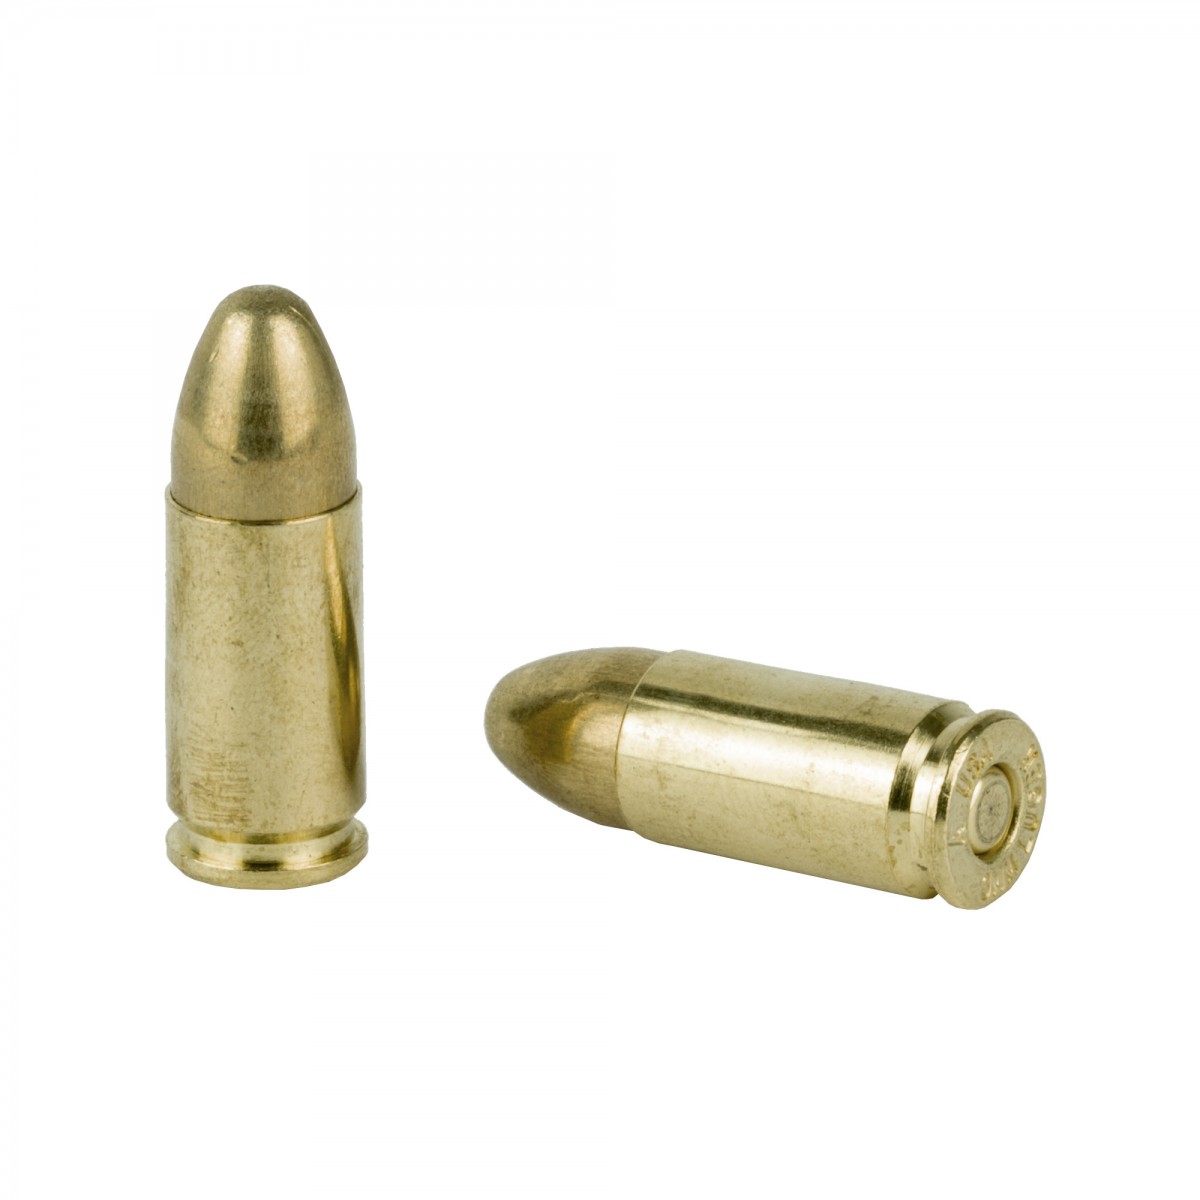 Armscor 9mm Luger Ammo 115gr FMJ 50 Rounds